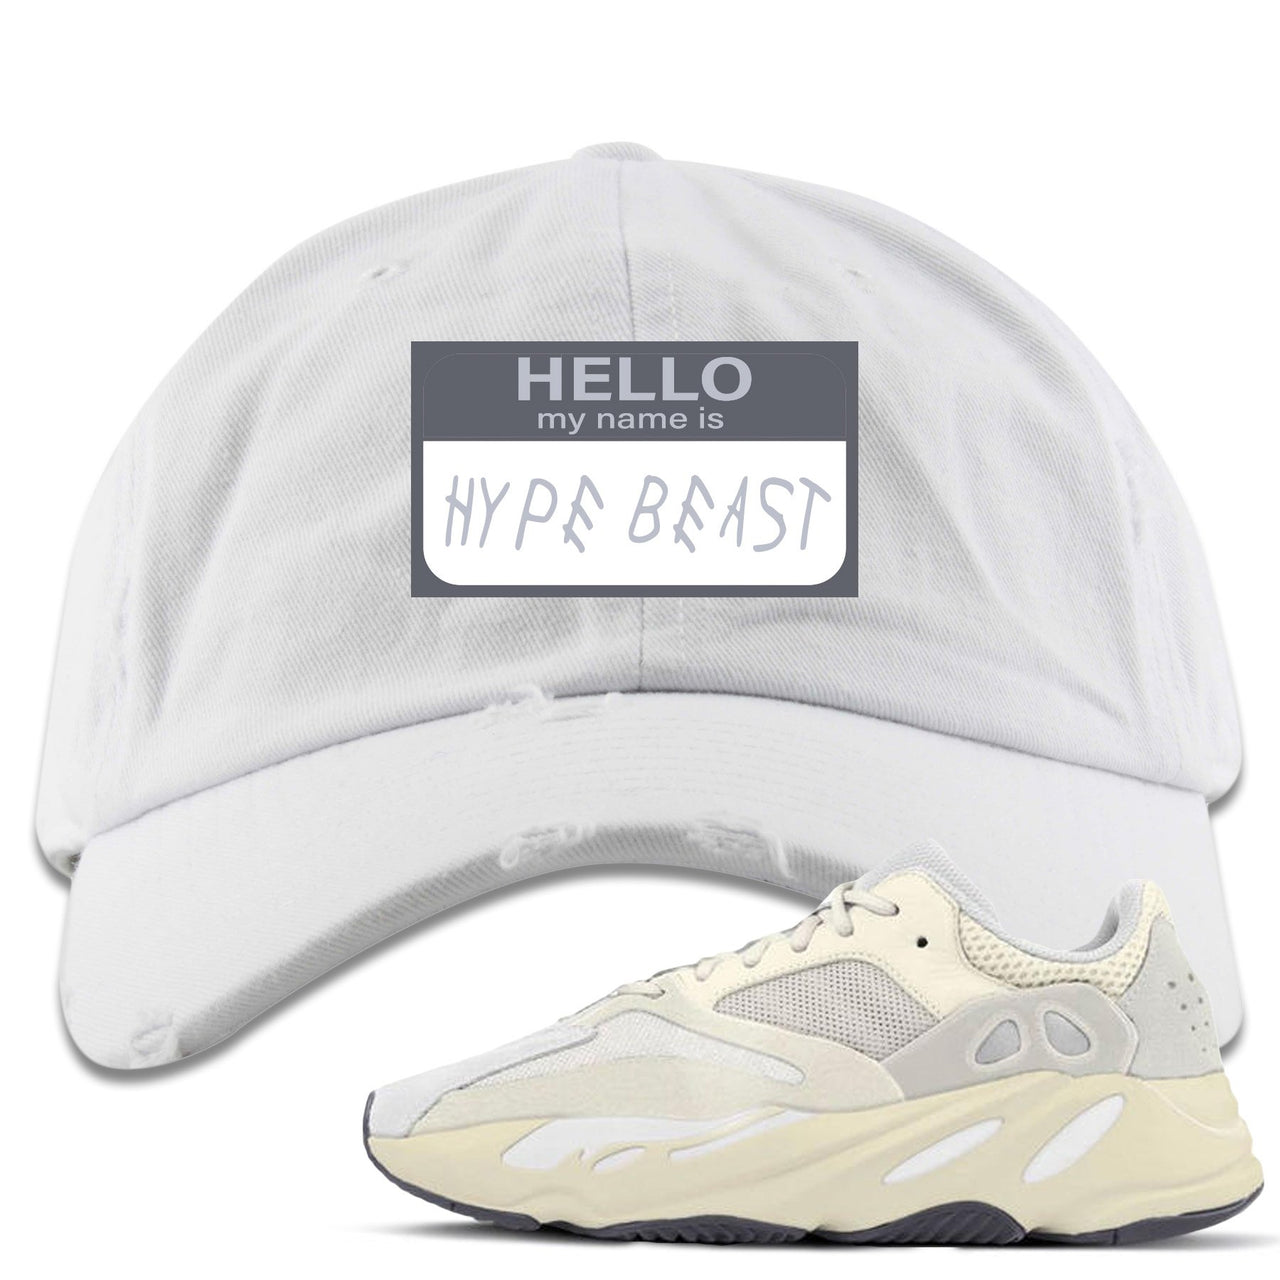 Analog 700s Distressed Dad Hat | Hello My Name Is Hype Beast Woe, White